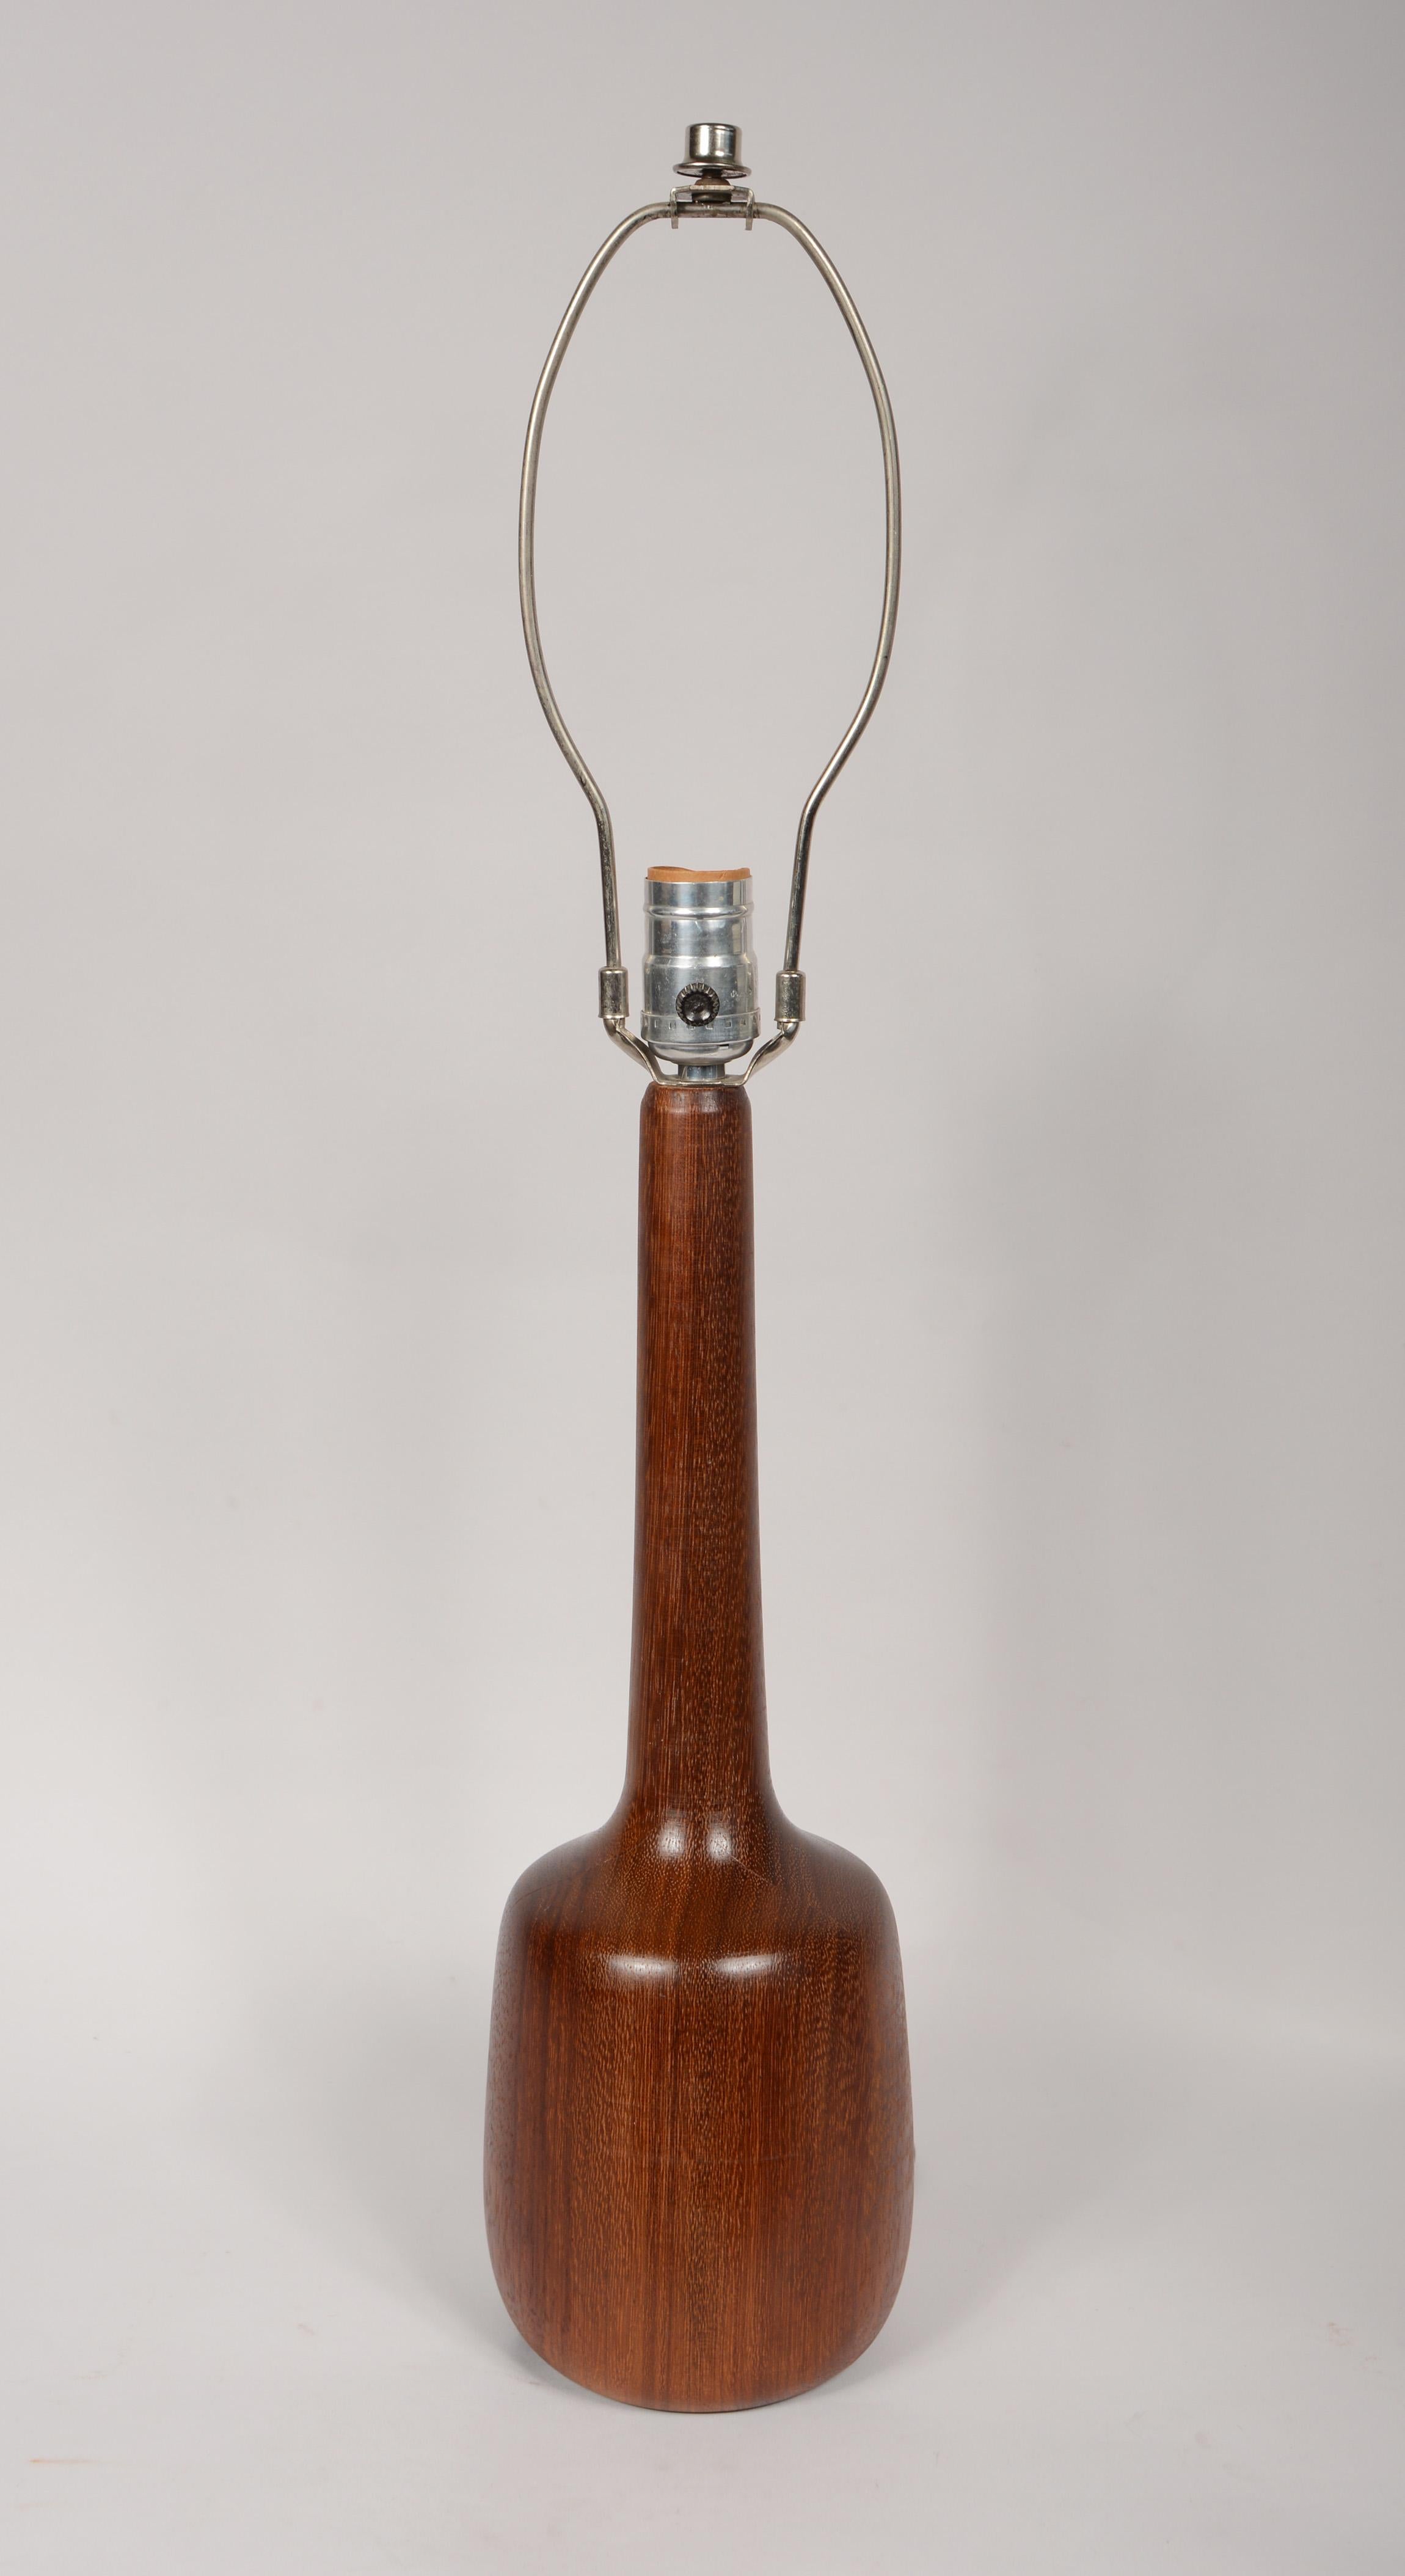 Turned solid teak table lamp. This lamp has a rich beautiful grain. Height to the bottom of the socket is 16 inches.